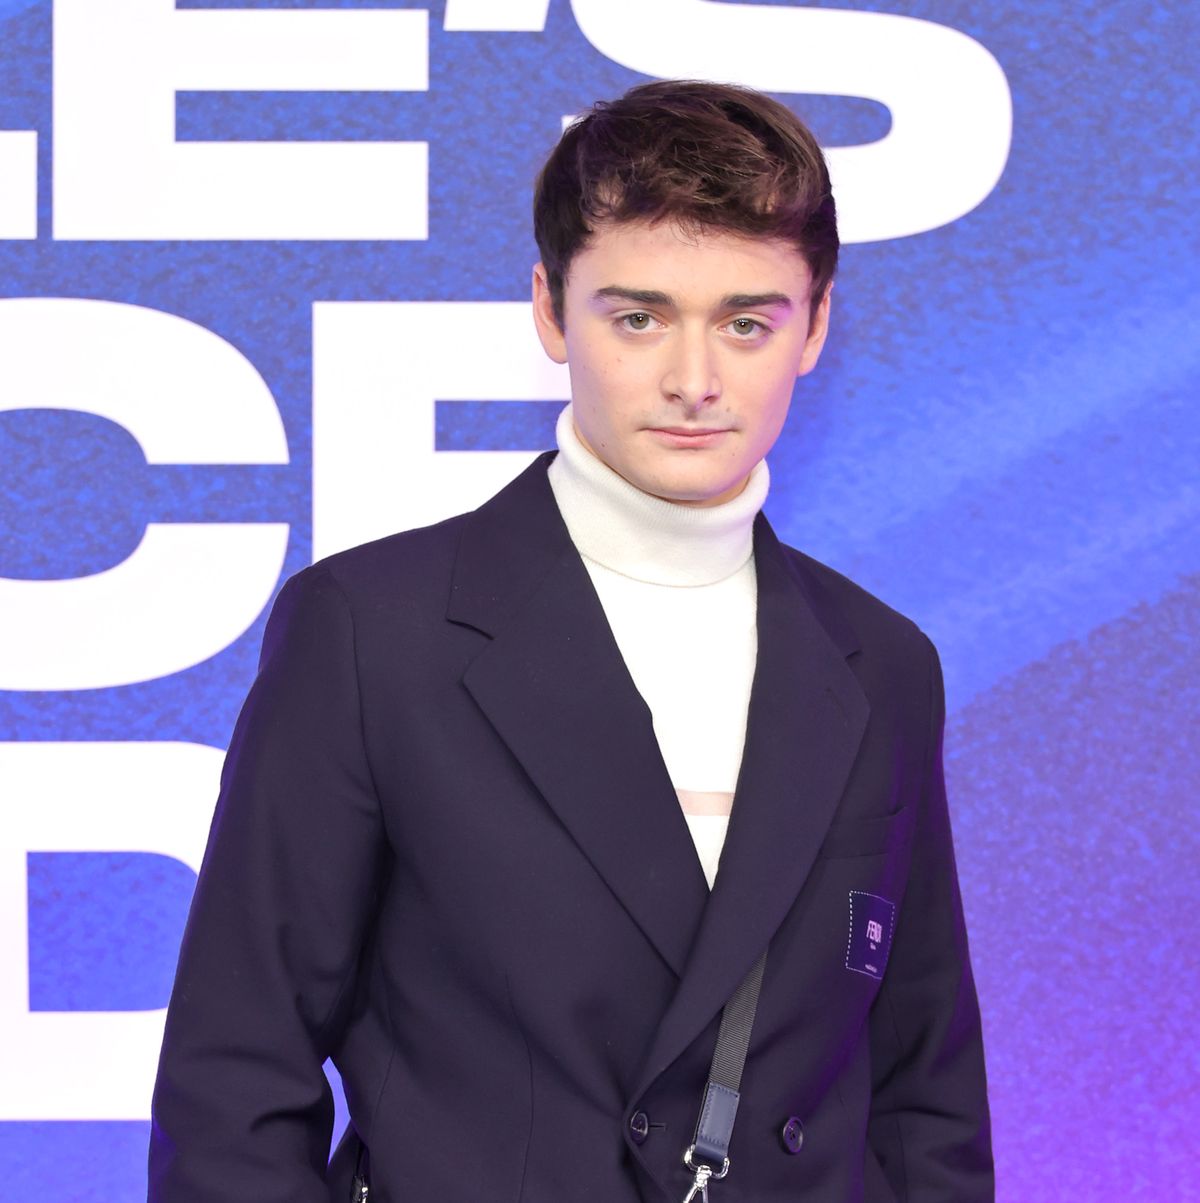 Noah Schnapp Comes Out as Gay in New TikTok